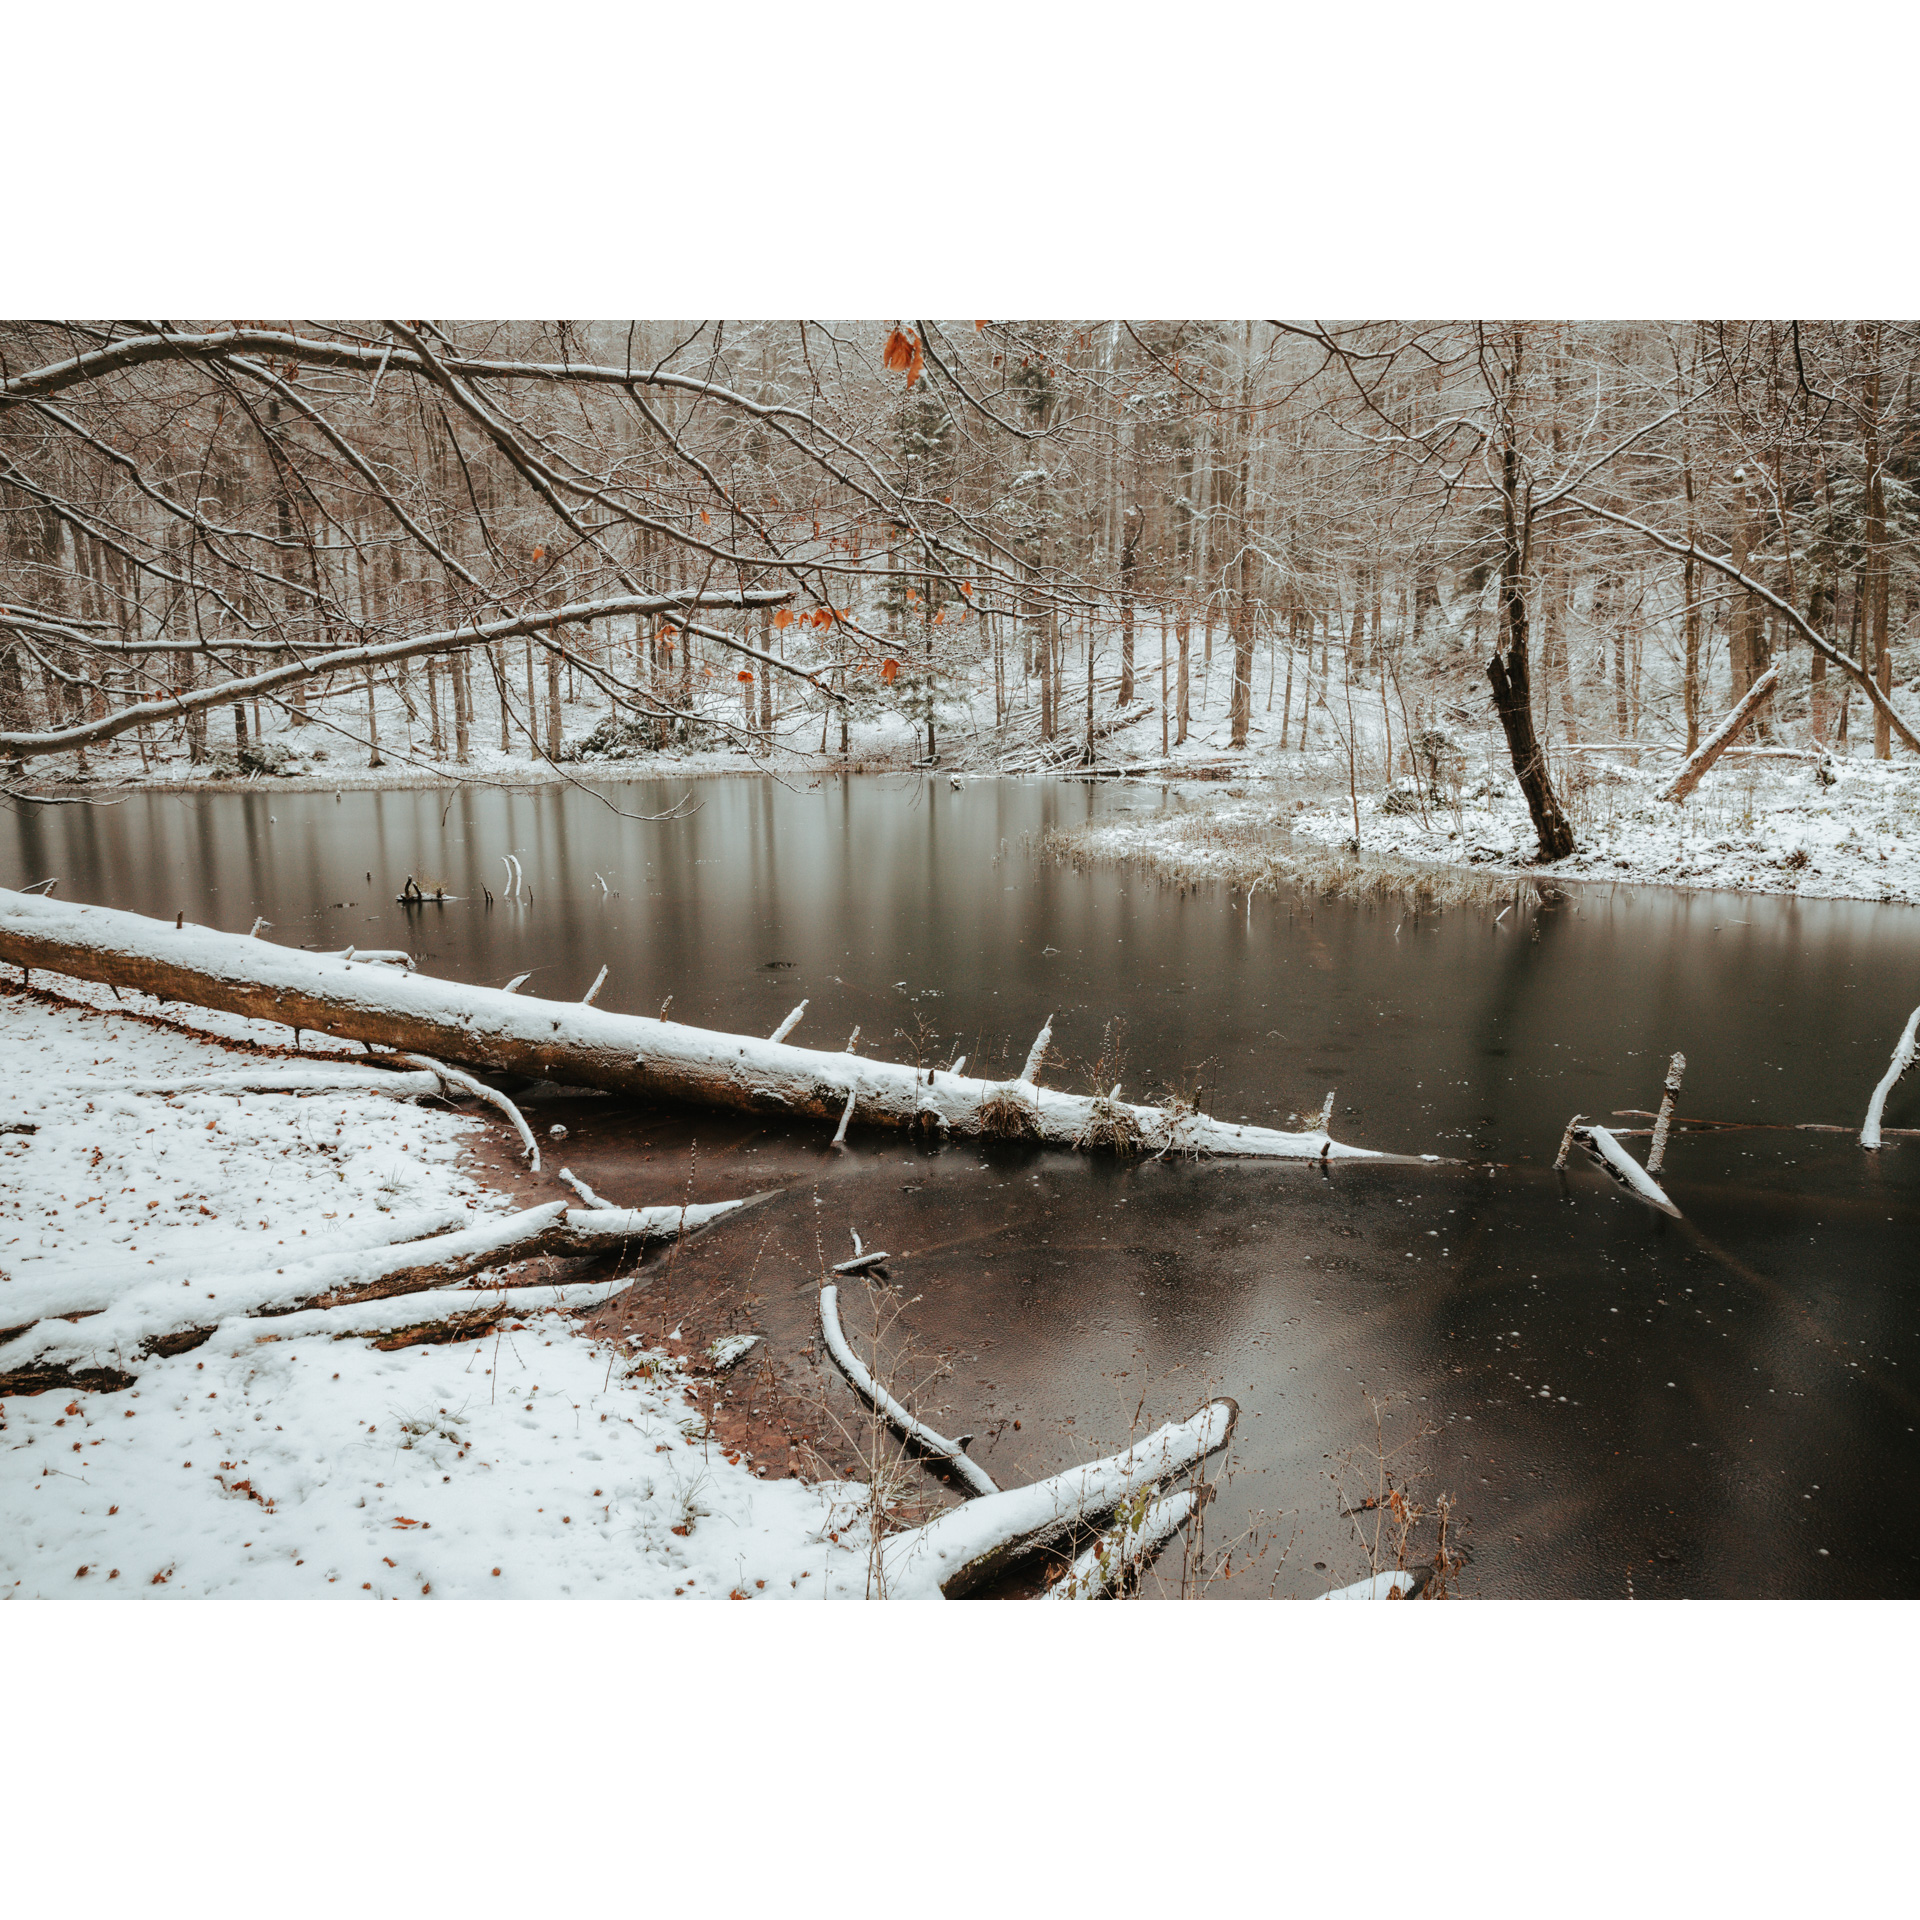 Snow-covered branch in the river among forest trees